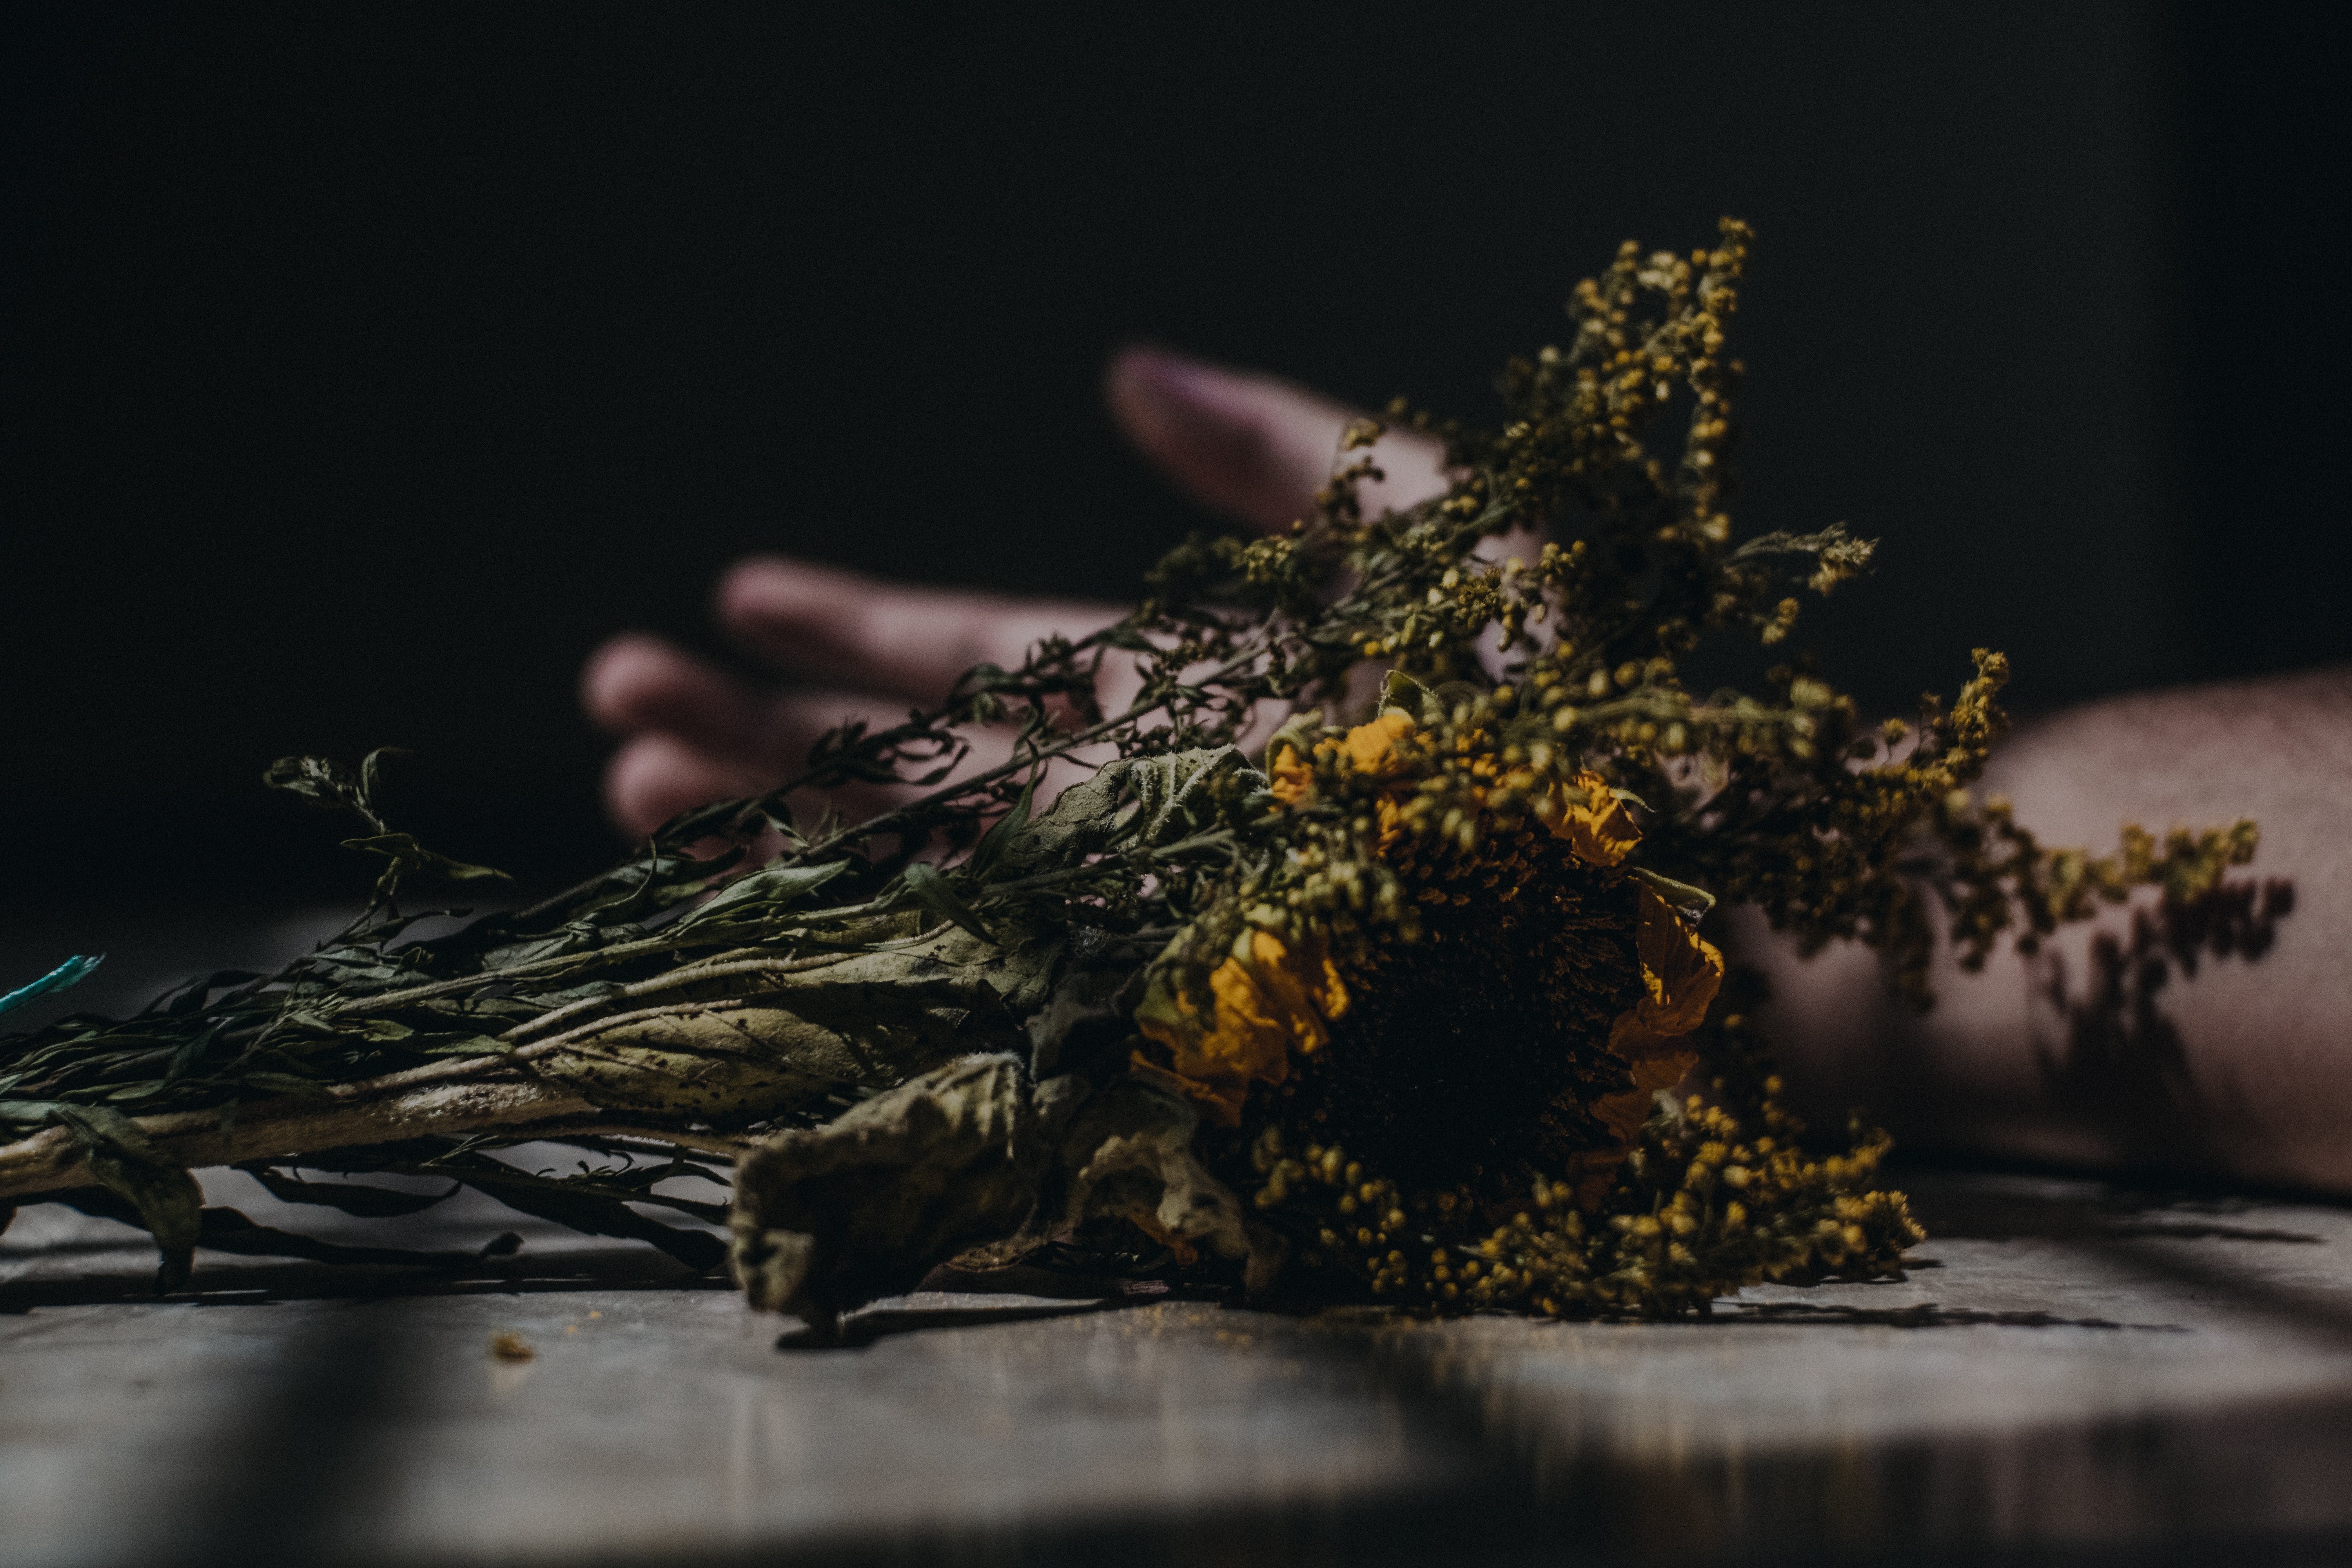 Visual representation depicting thantophobia the fear of losing someone you love; dried flowers symbolizing the fear of death and loss.